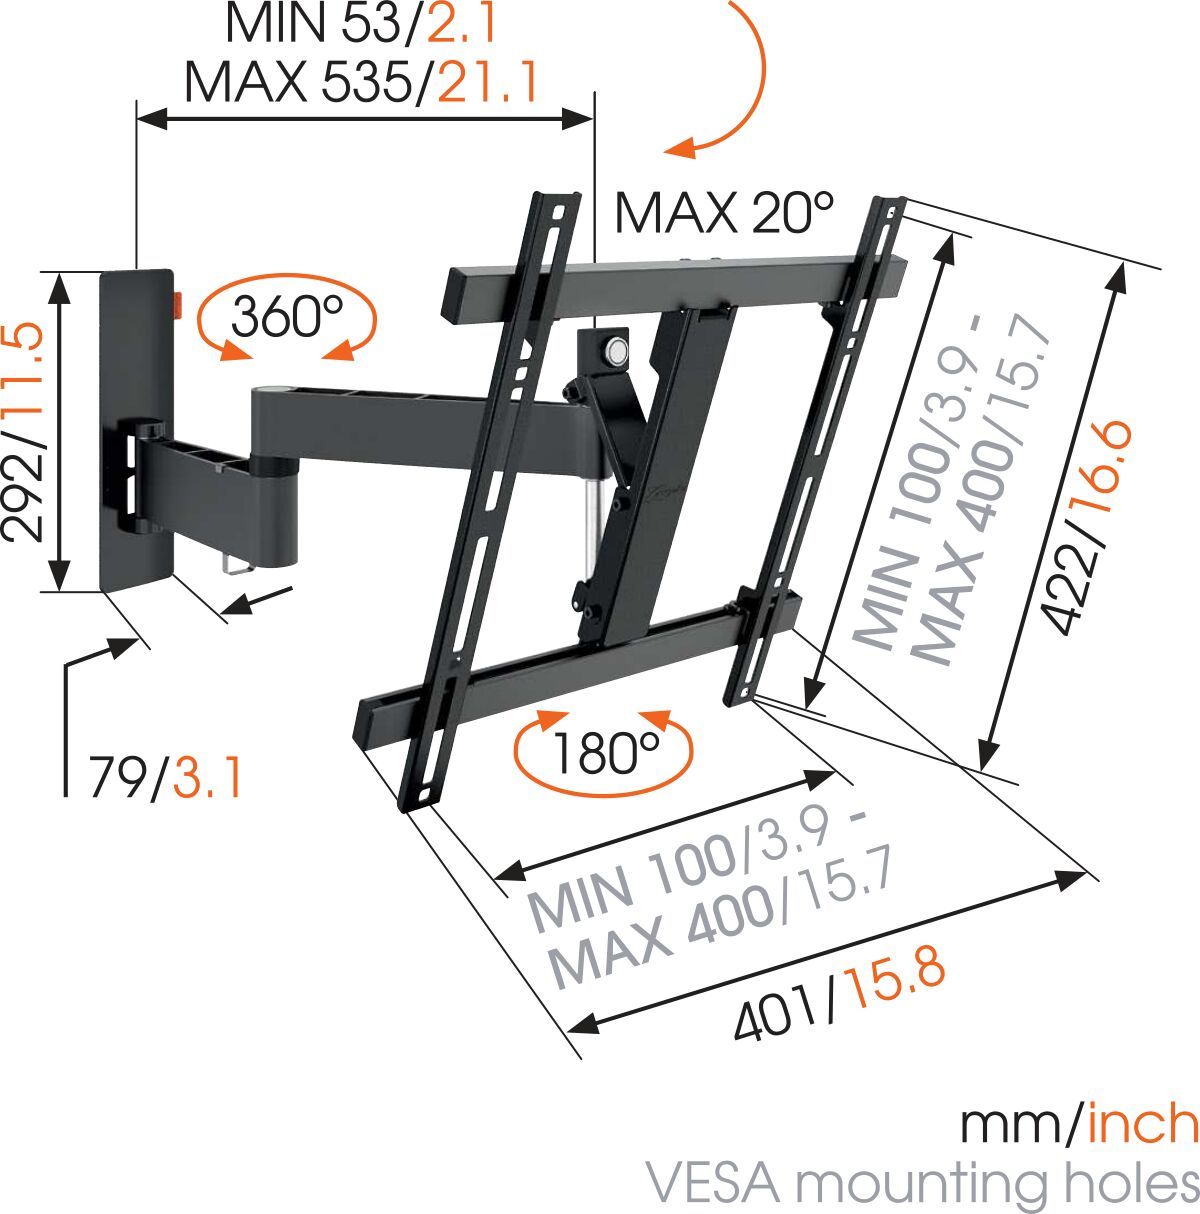 Vogel's WALL 2245 Full-Motion TV Wall Mount (black) - Suitable for 32 up to 55 inch TVs - Full motion (up to 180°) - Tilt up to 20° - Dimensions